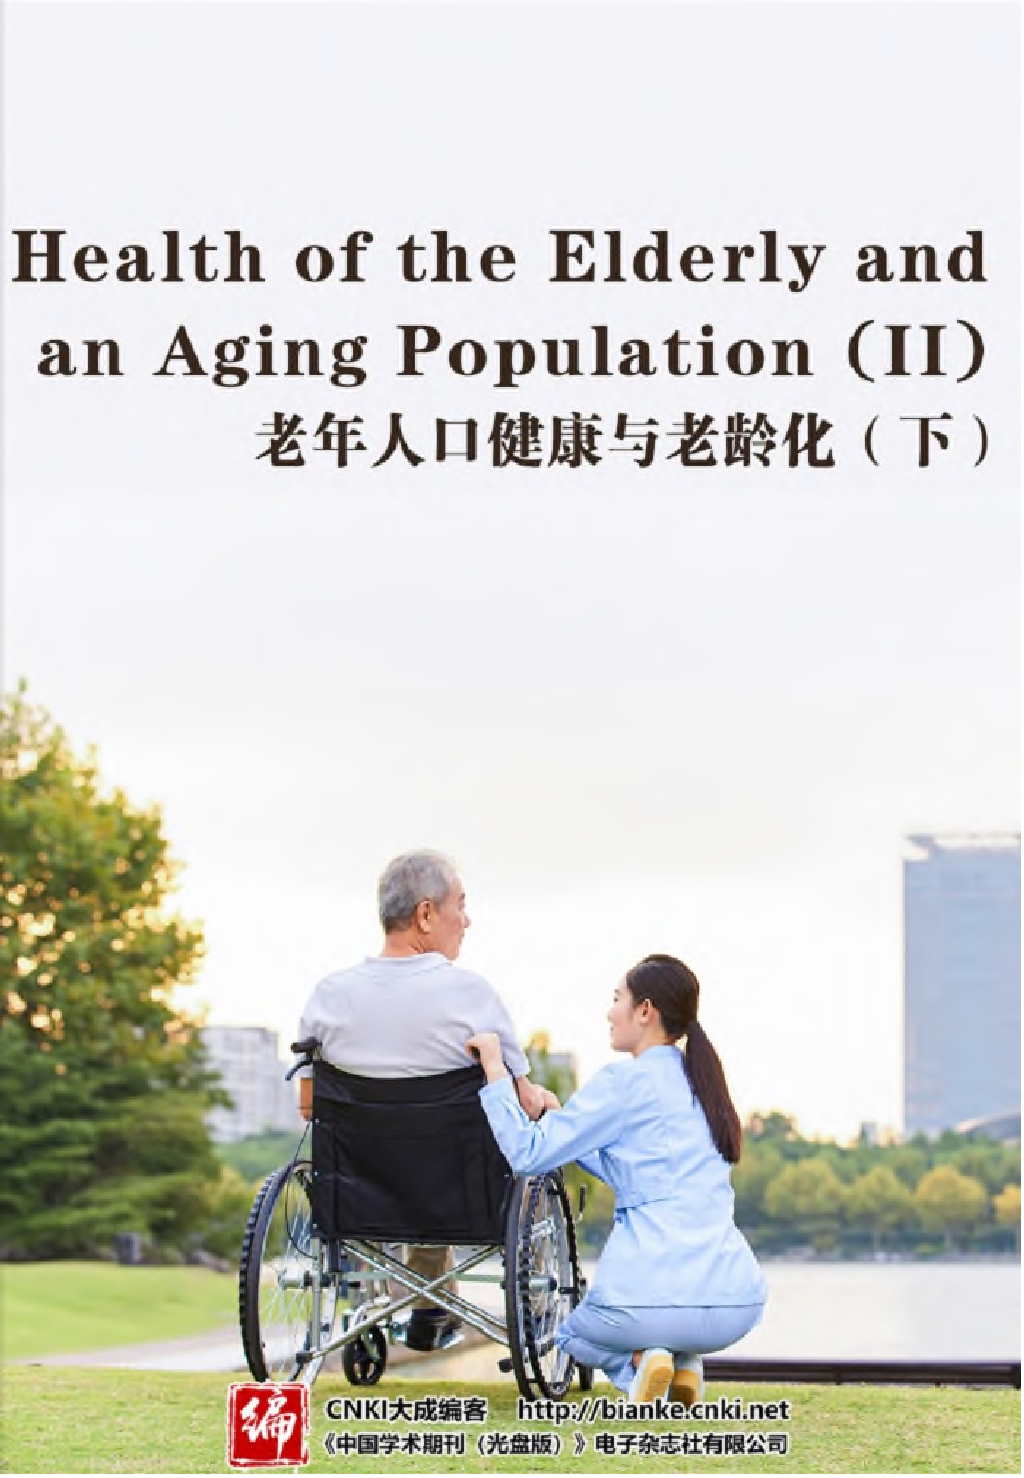 Health of the Elderly and an Aging Population